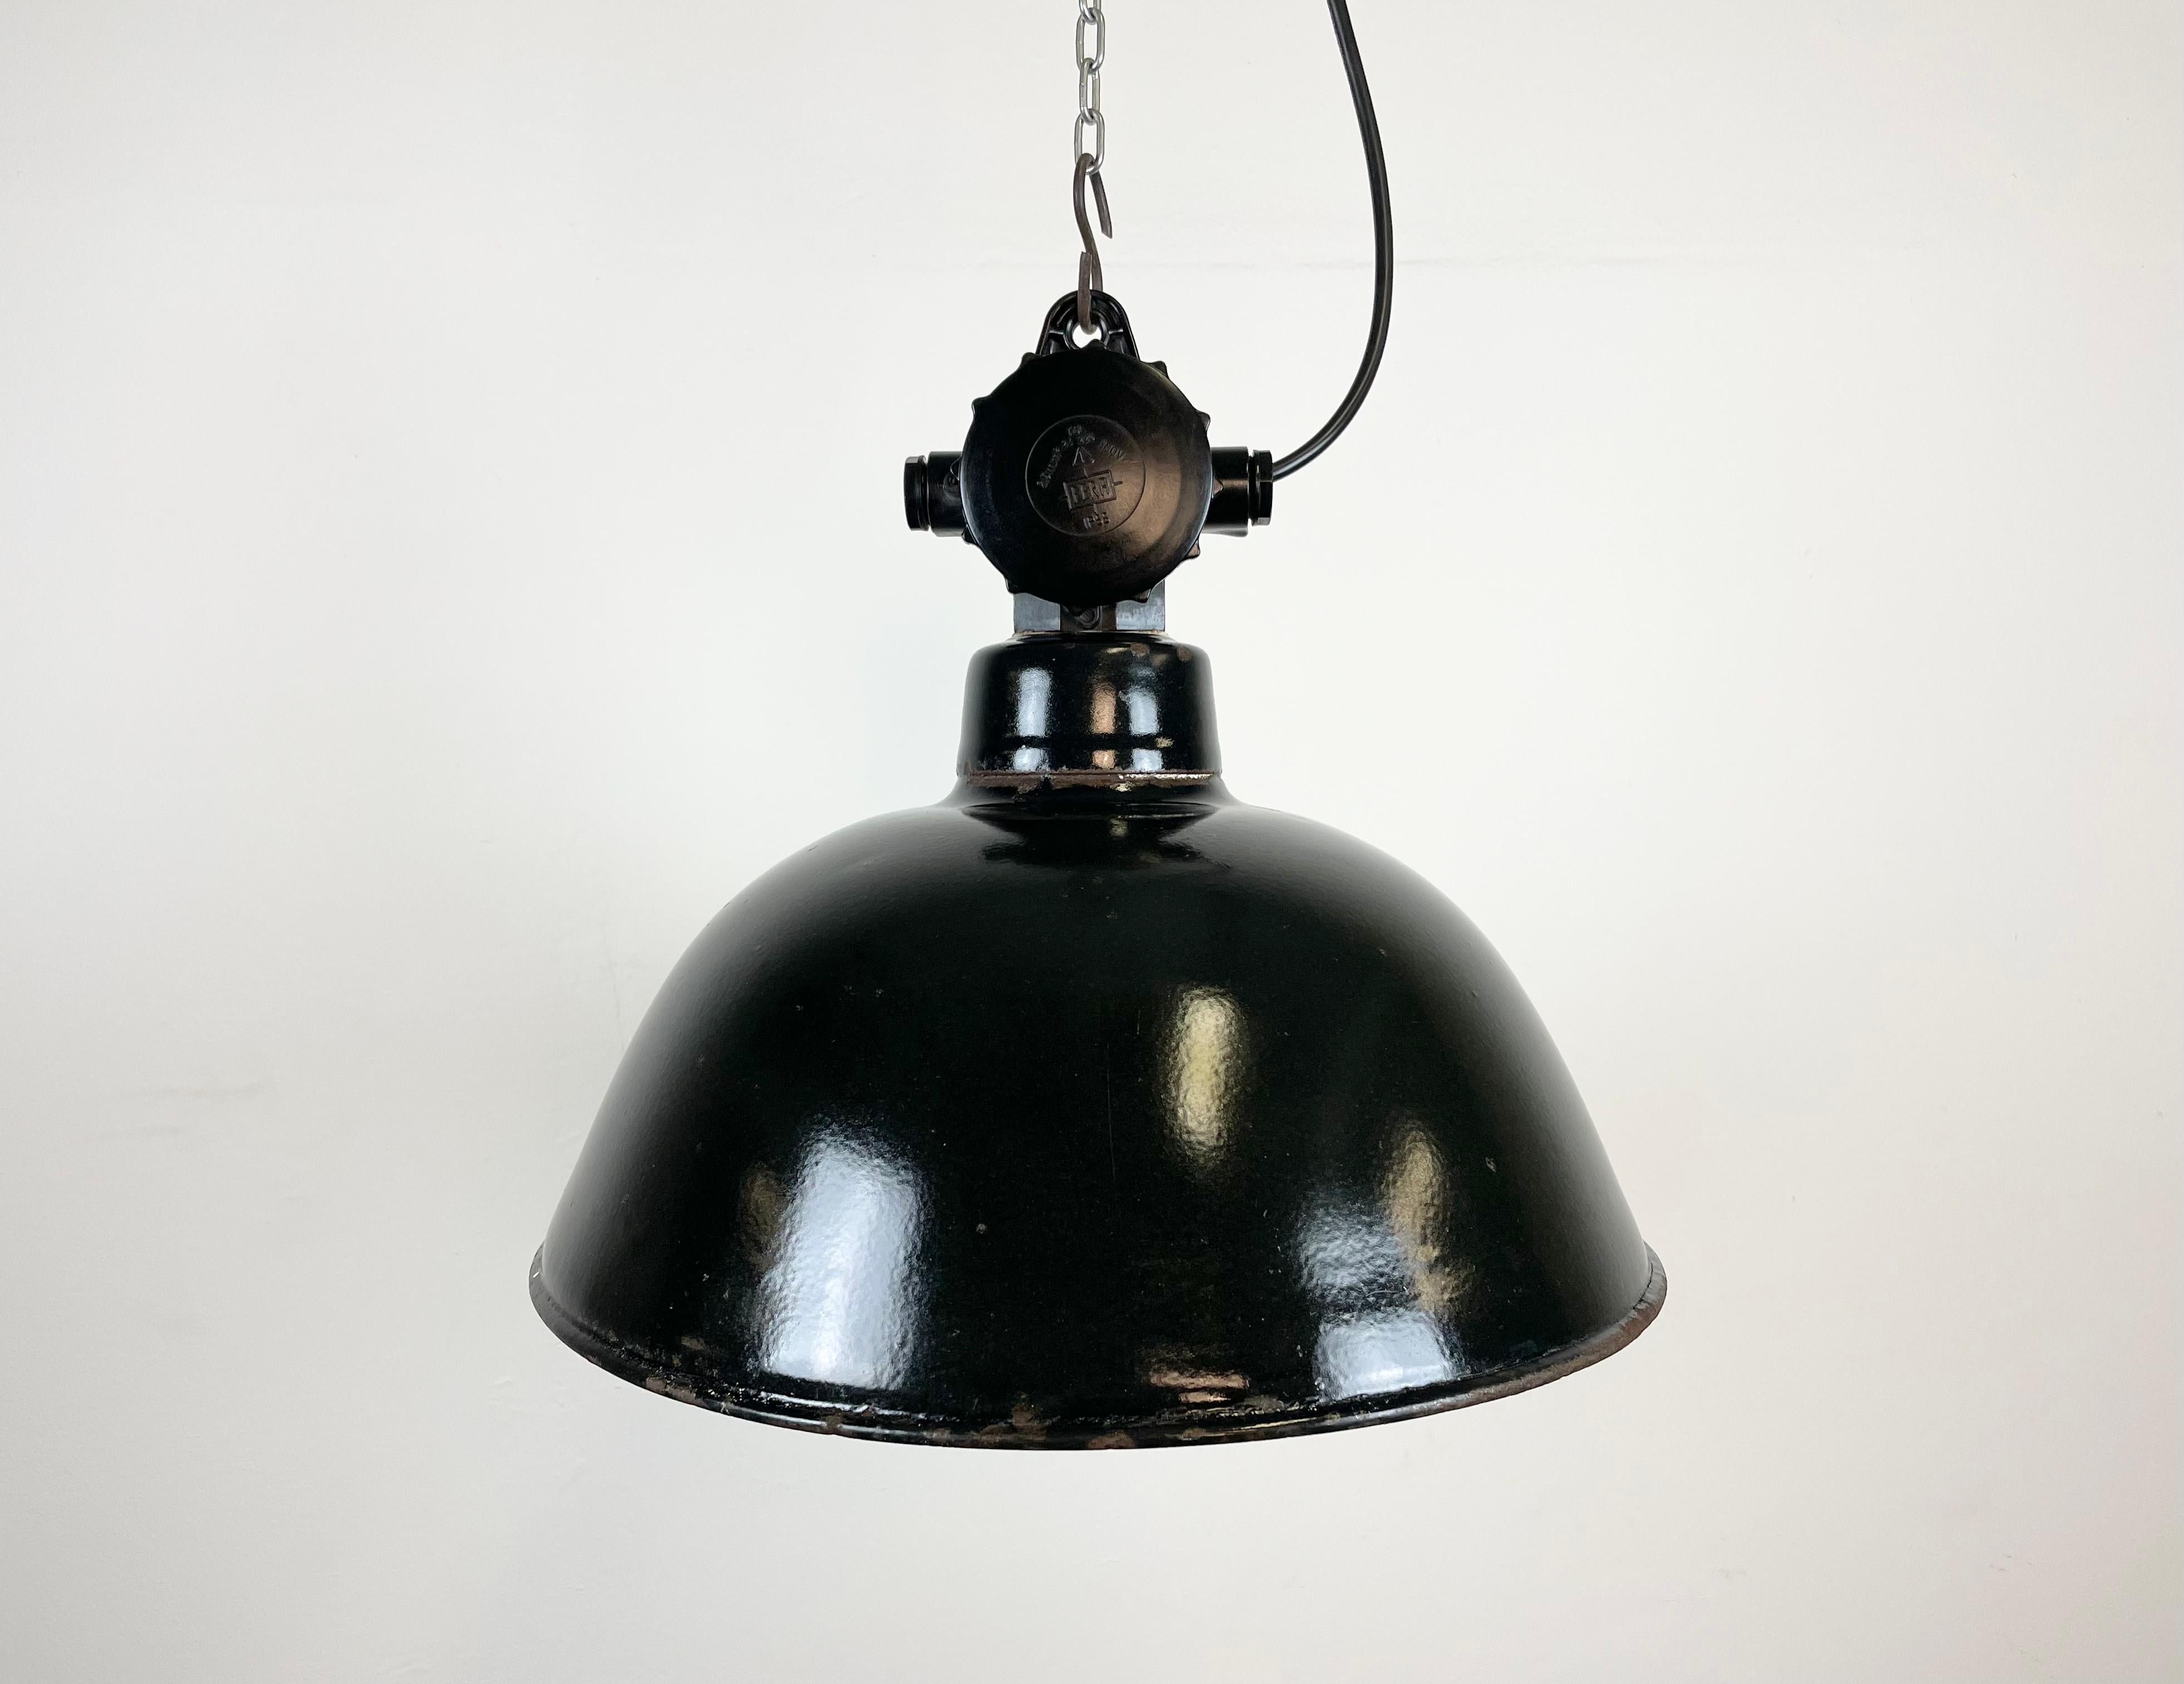 Industrial enamel factory lamp made by Lbd Veb Leuchtenbau Dresden in East Germany during the 1950s.It features black enamel shade with white enamel interior and bakelite top.The porcelain socket requires E 27 light bulbs. New wire. The weight of